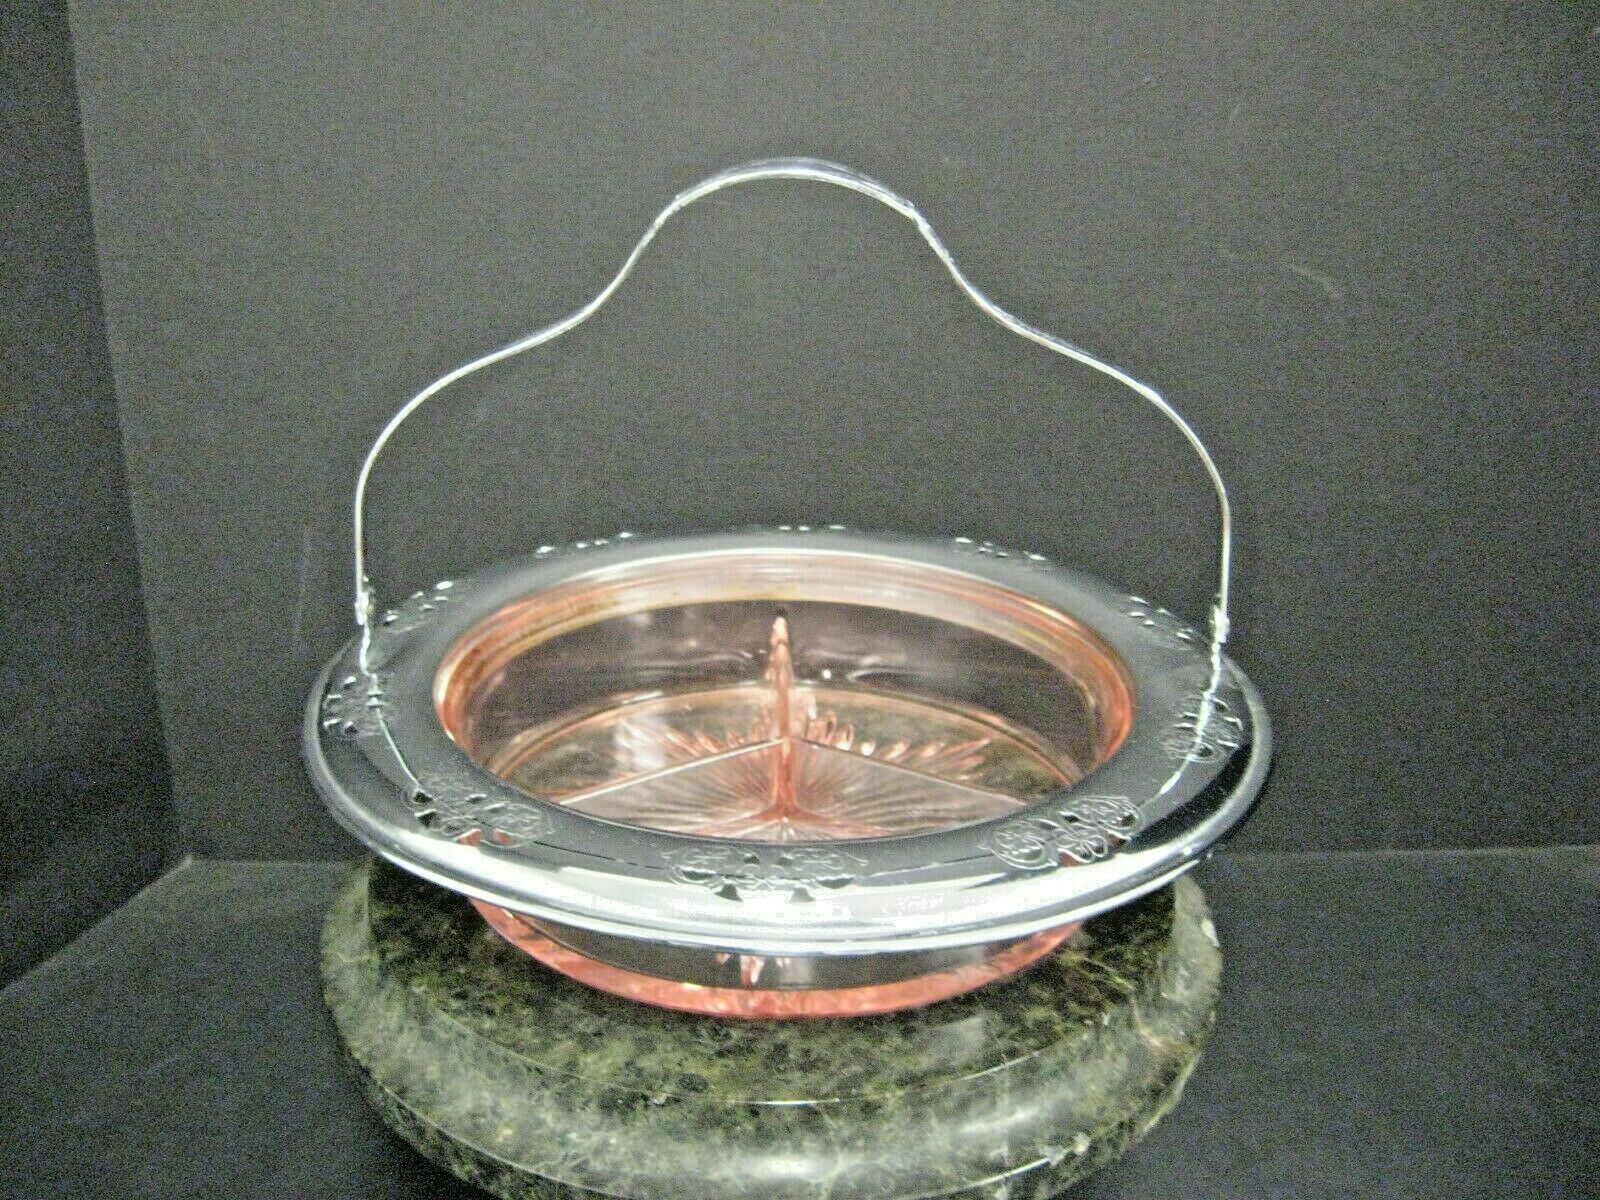 Faberware Art Deco Crome Divided Pink Depression Glass Relish Candy Dish Tray